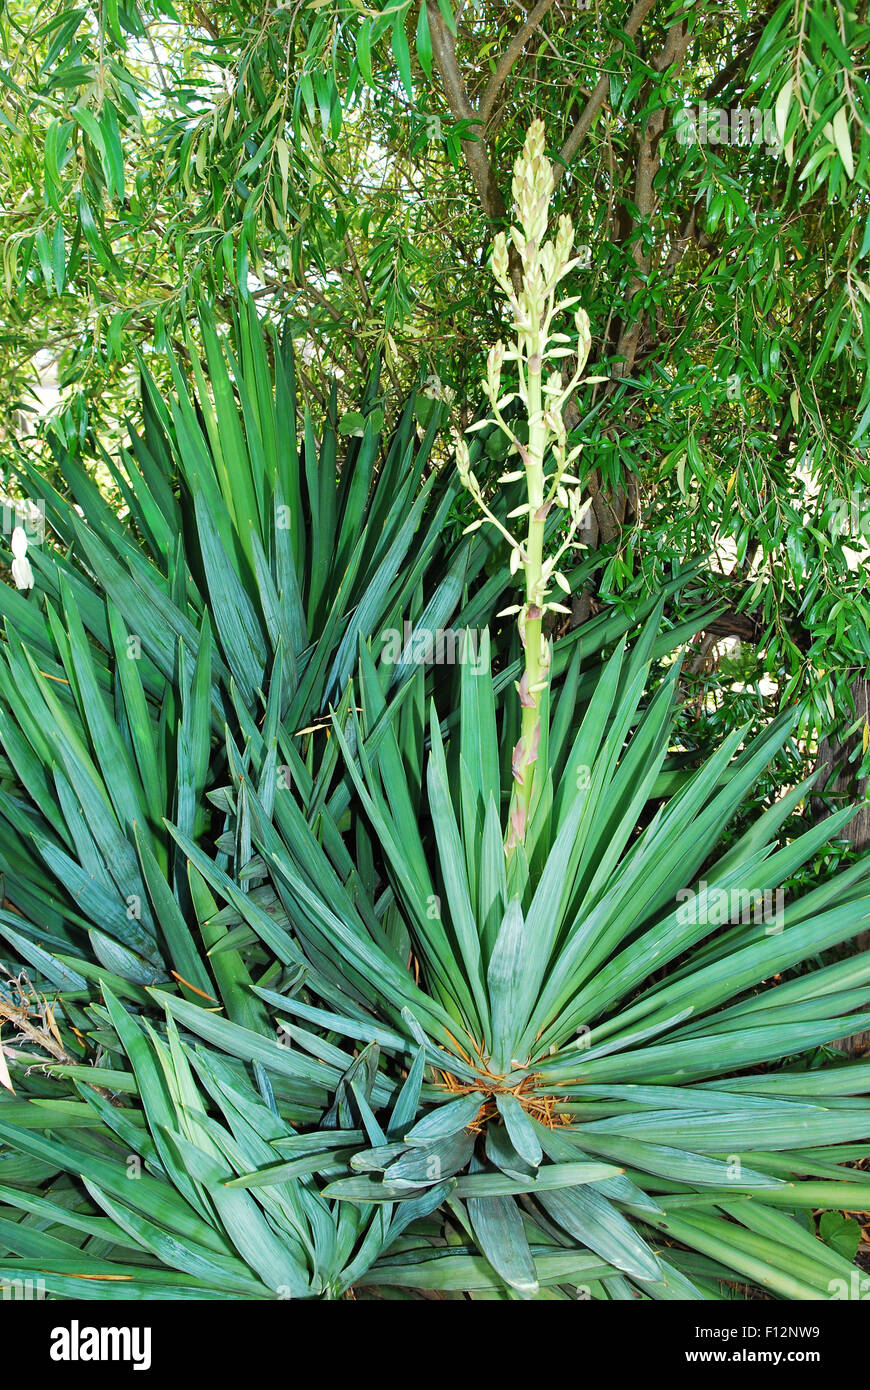 Yucca plant in flower Stock Photo